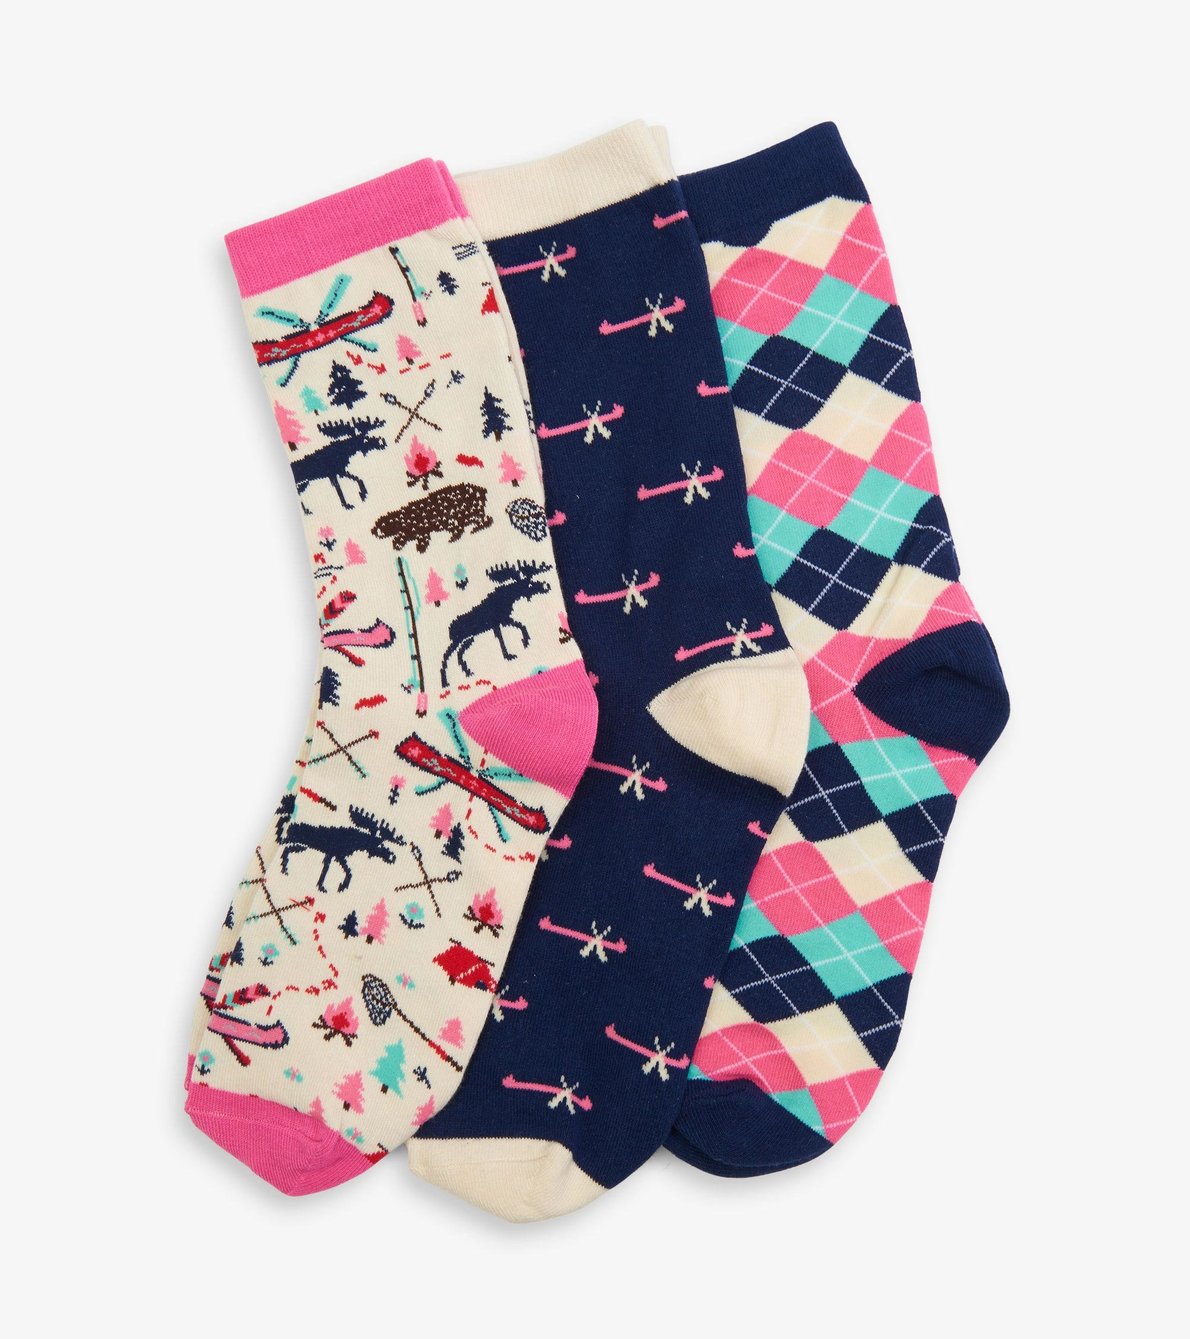 View larger image of Summer Camp Women’s Crew Sock Set